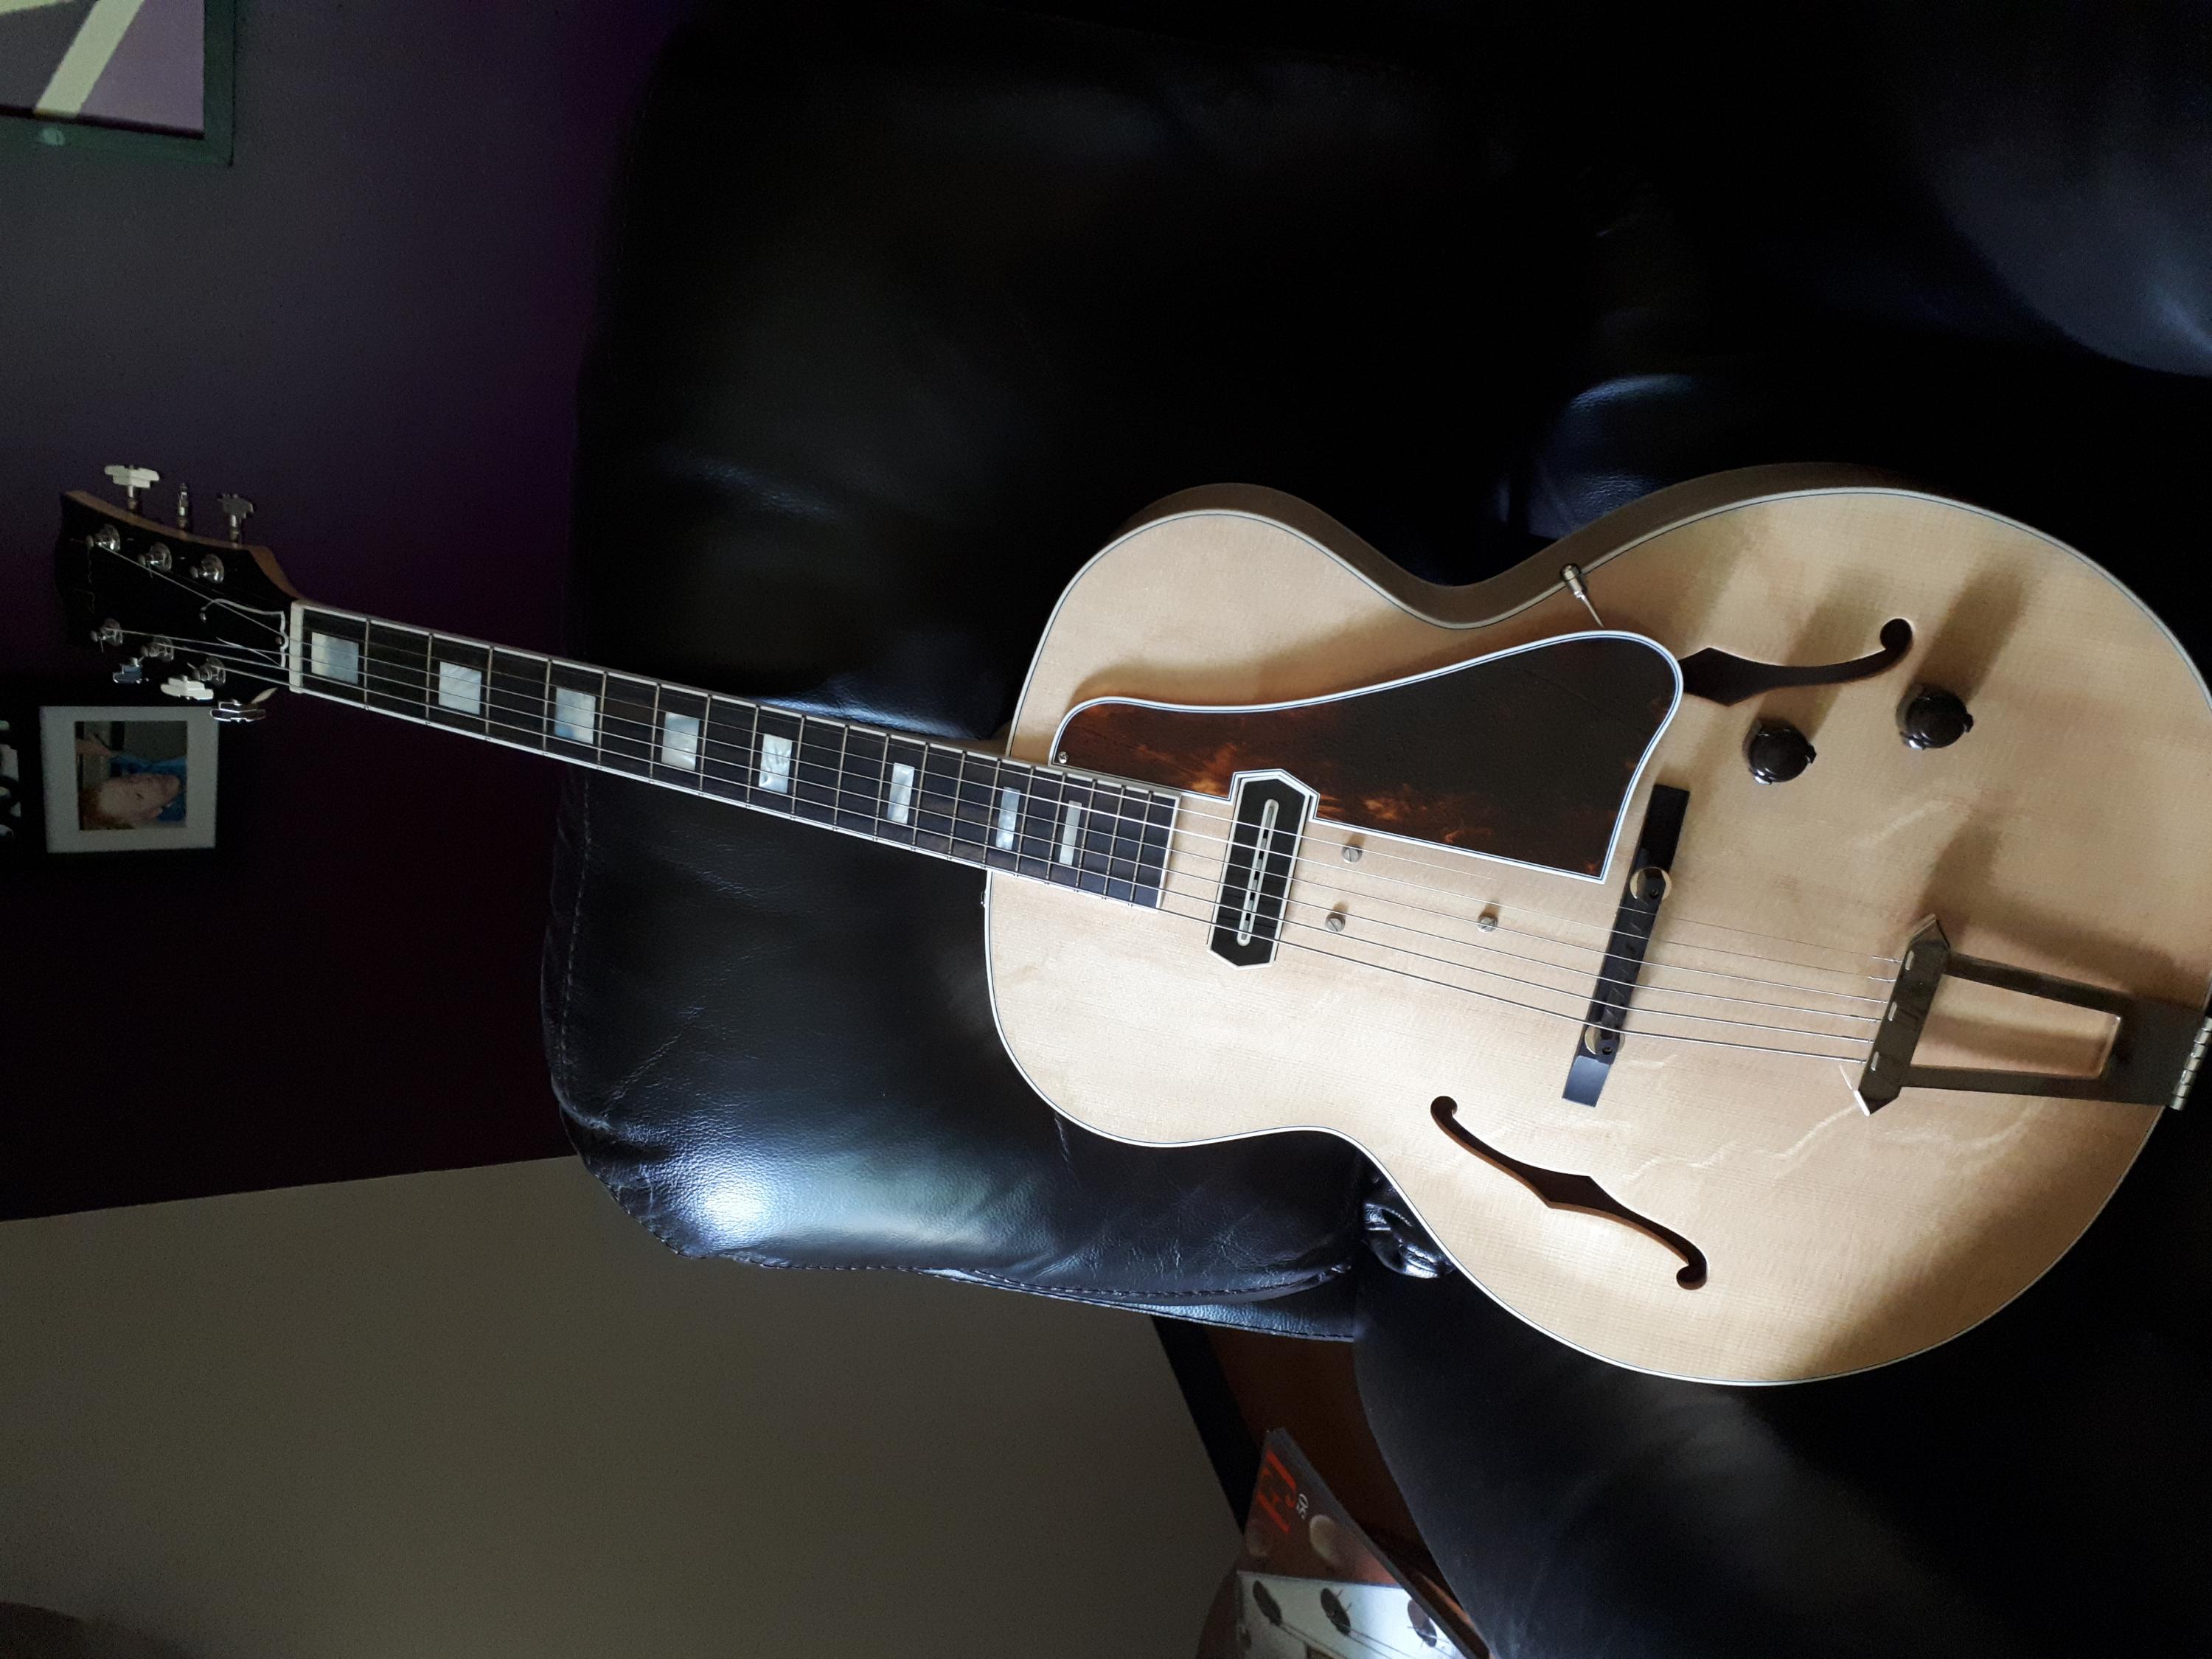 New guy and an ES-250 inspired build-20220805_164533-jpg